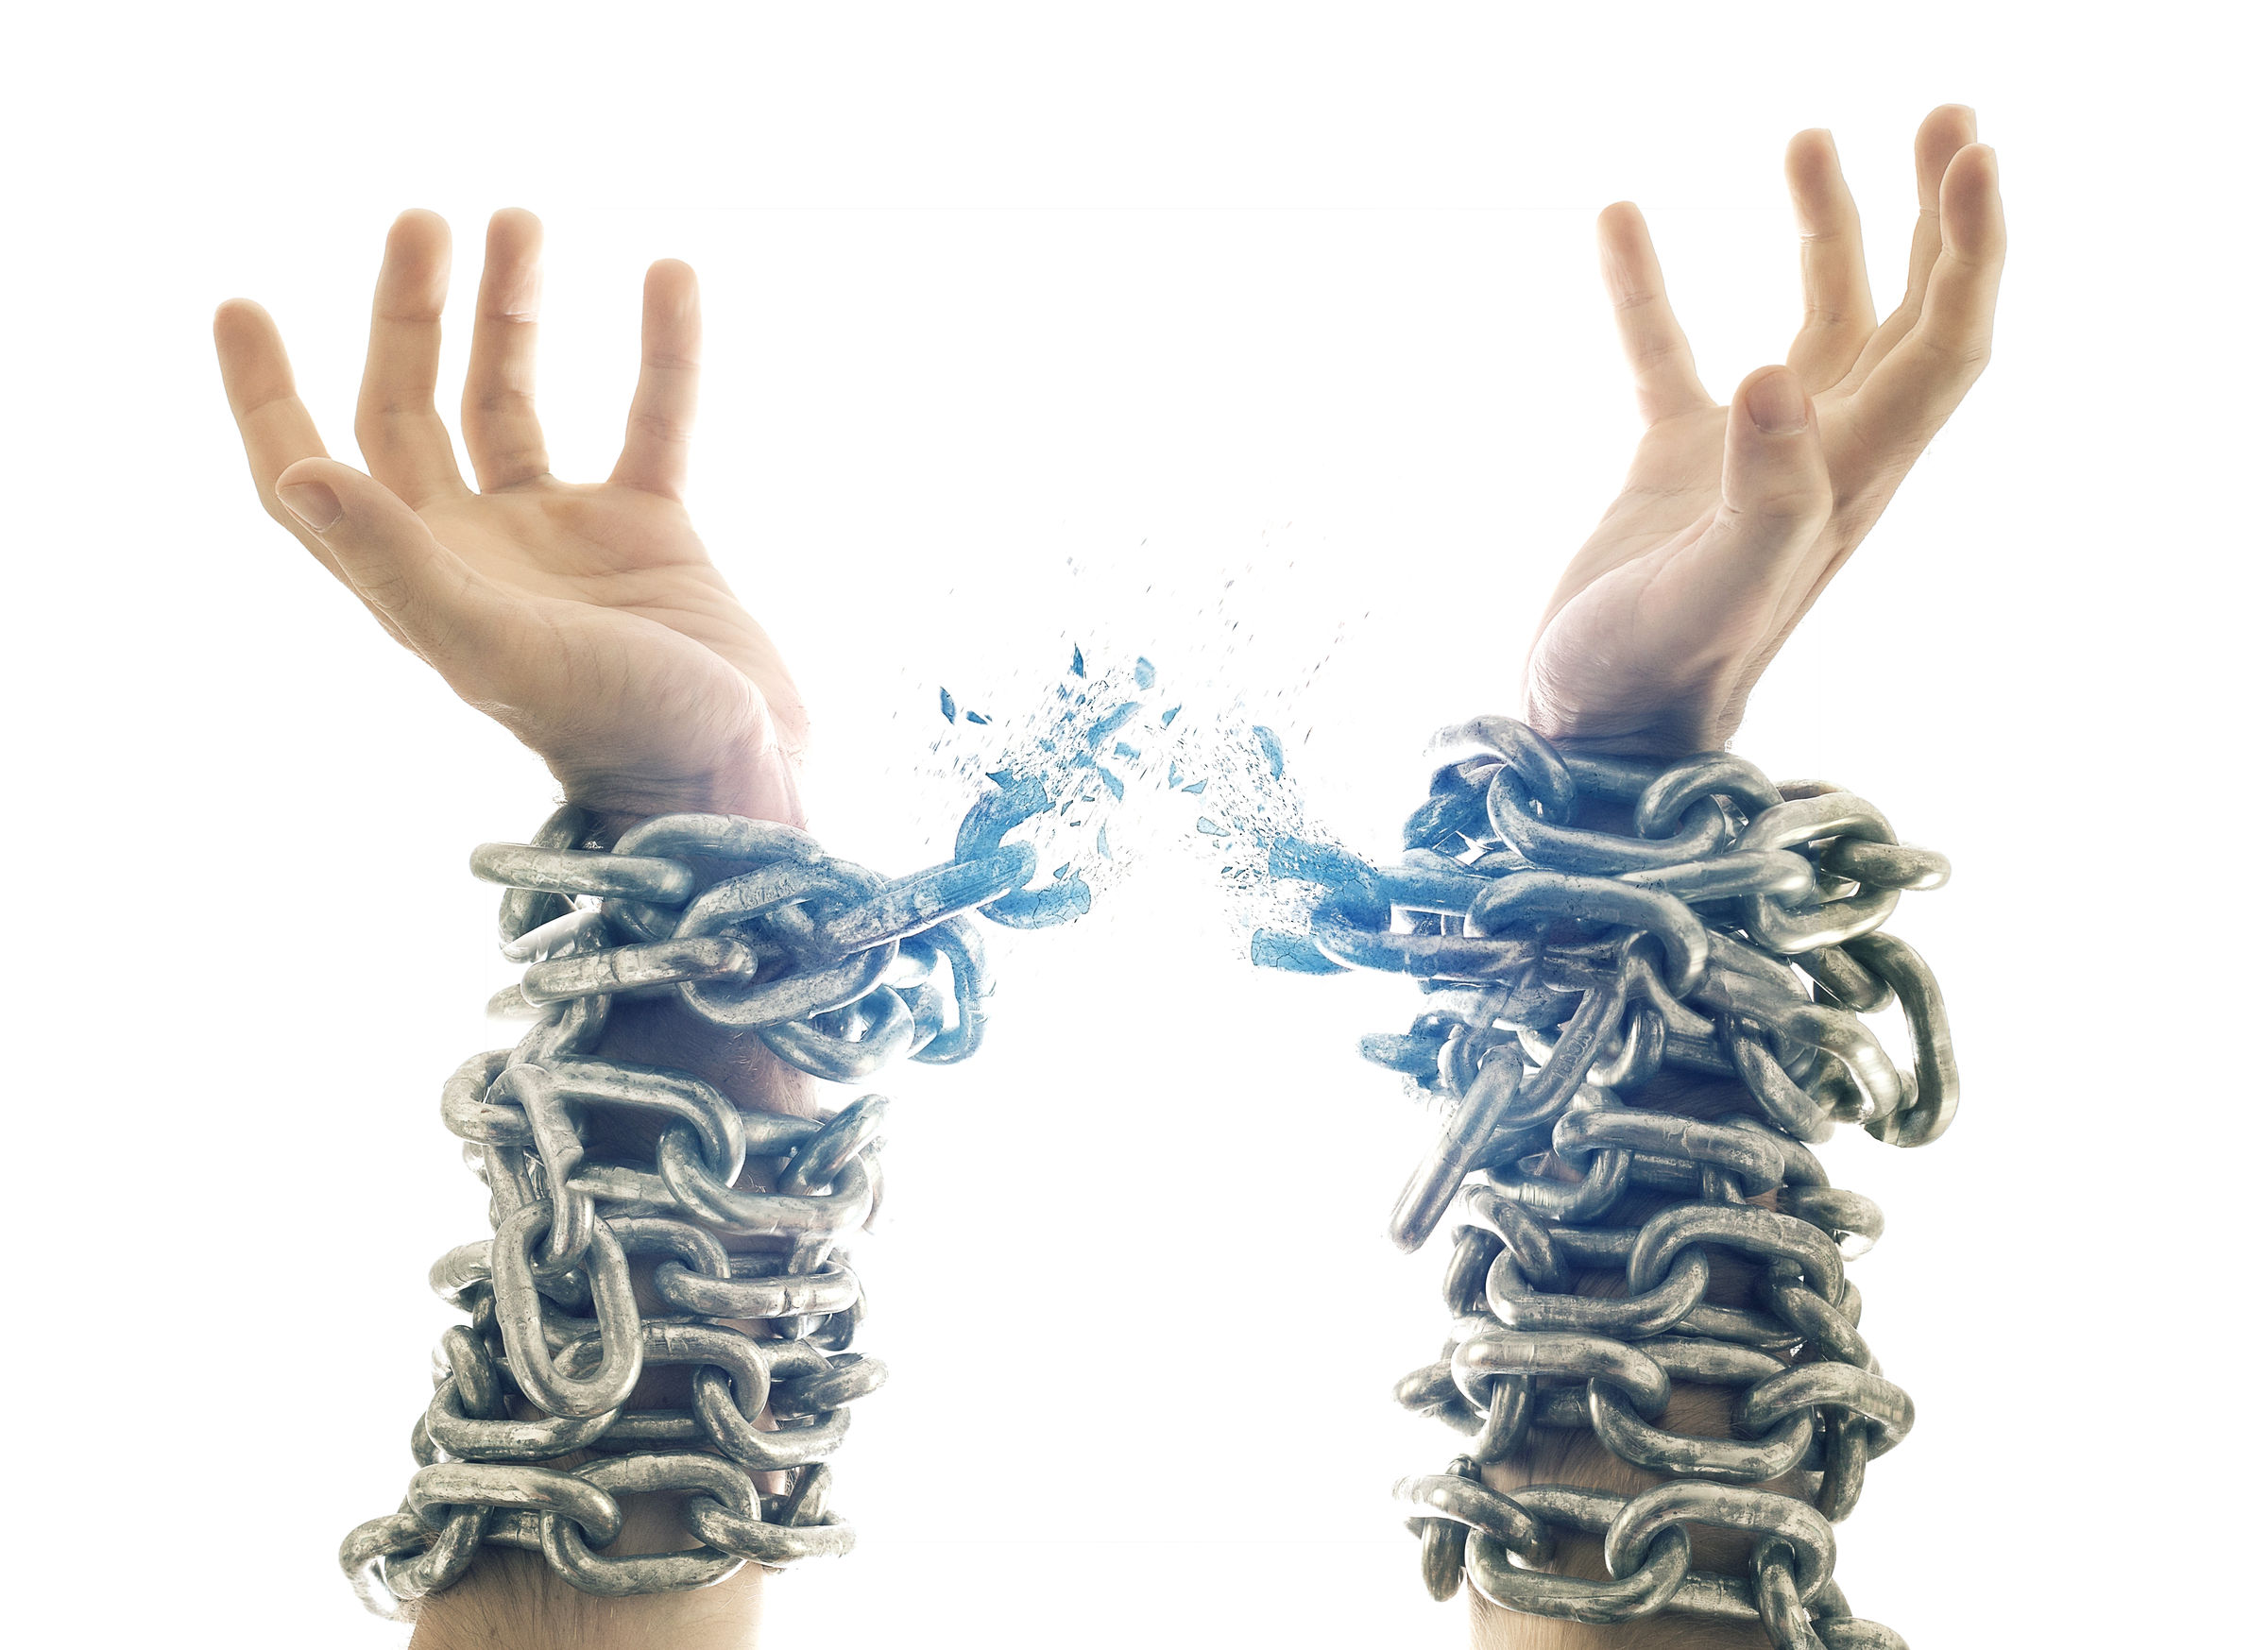 Photo of chains breaking - from article on breaking the chains of poverty - brought to you by the Farming God's Way Ministry of Heaven's Family